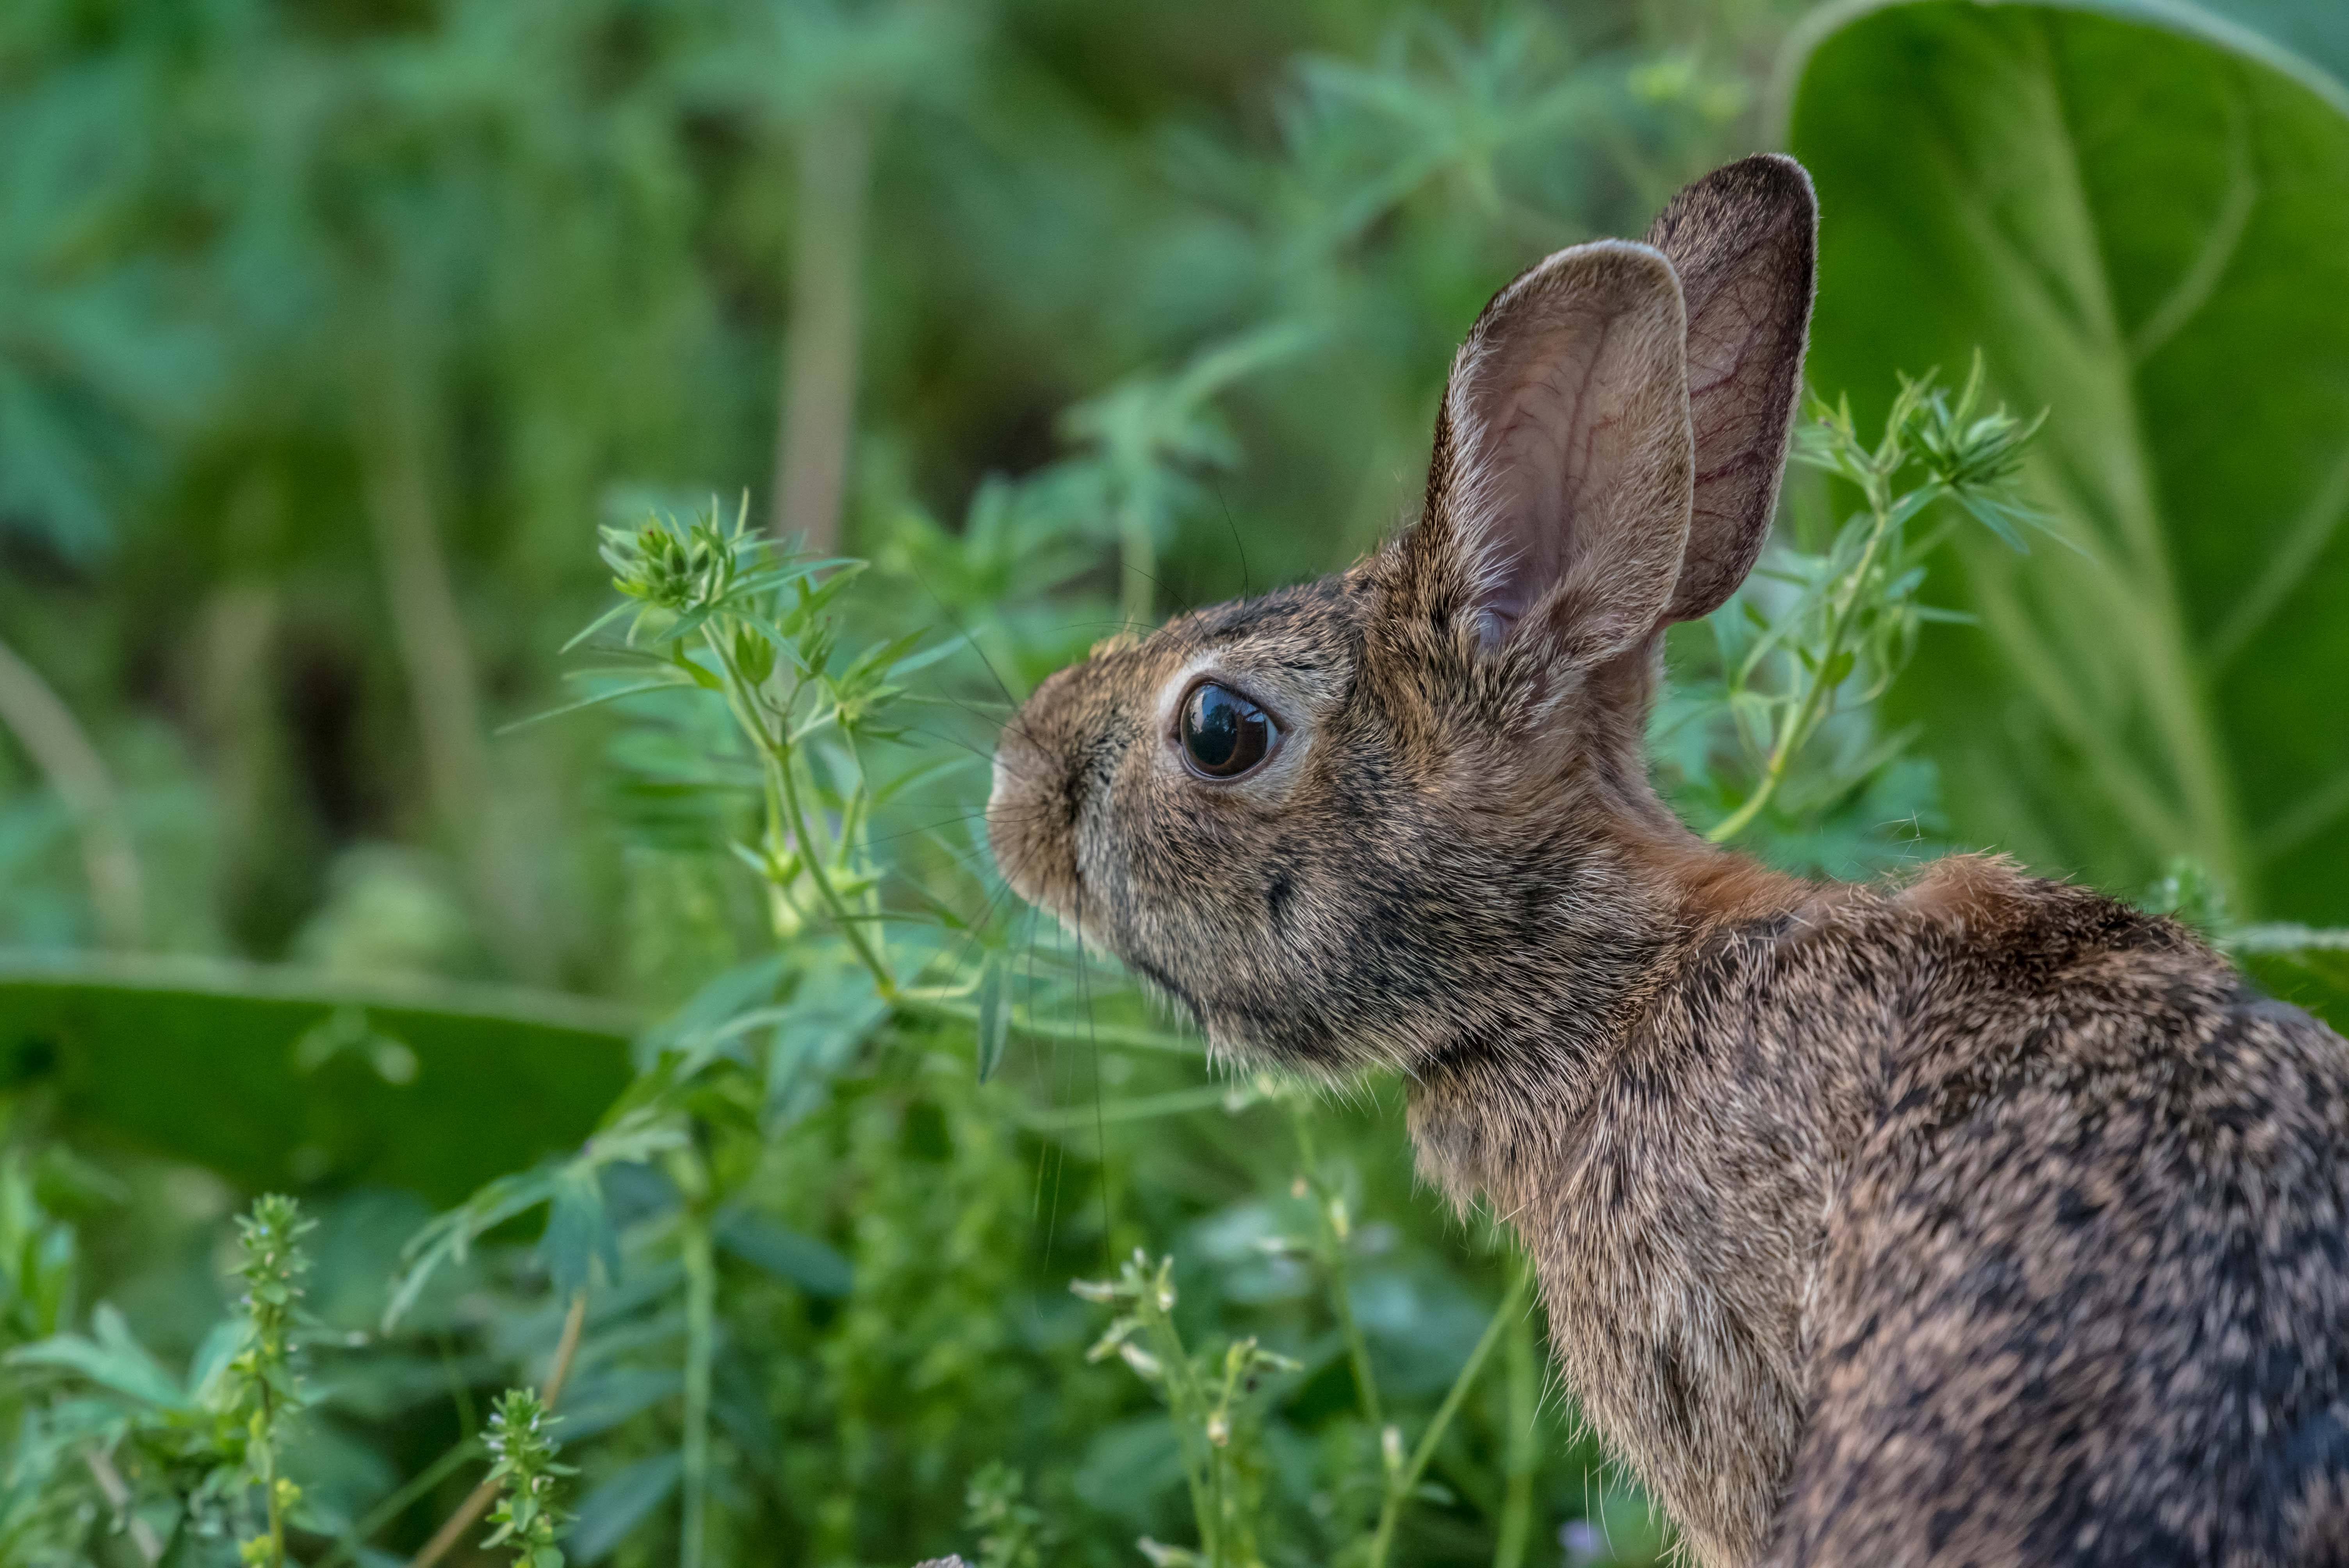 How To Protect Plants From Rabbits The Best Way To Keep Rabbits